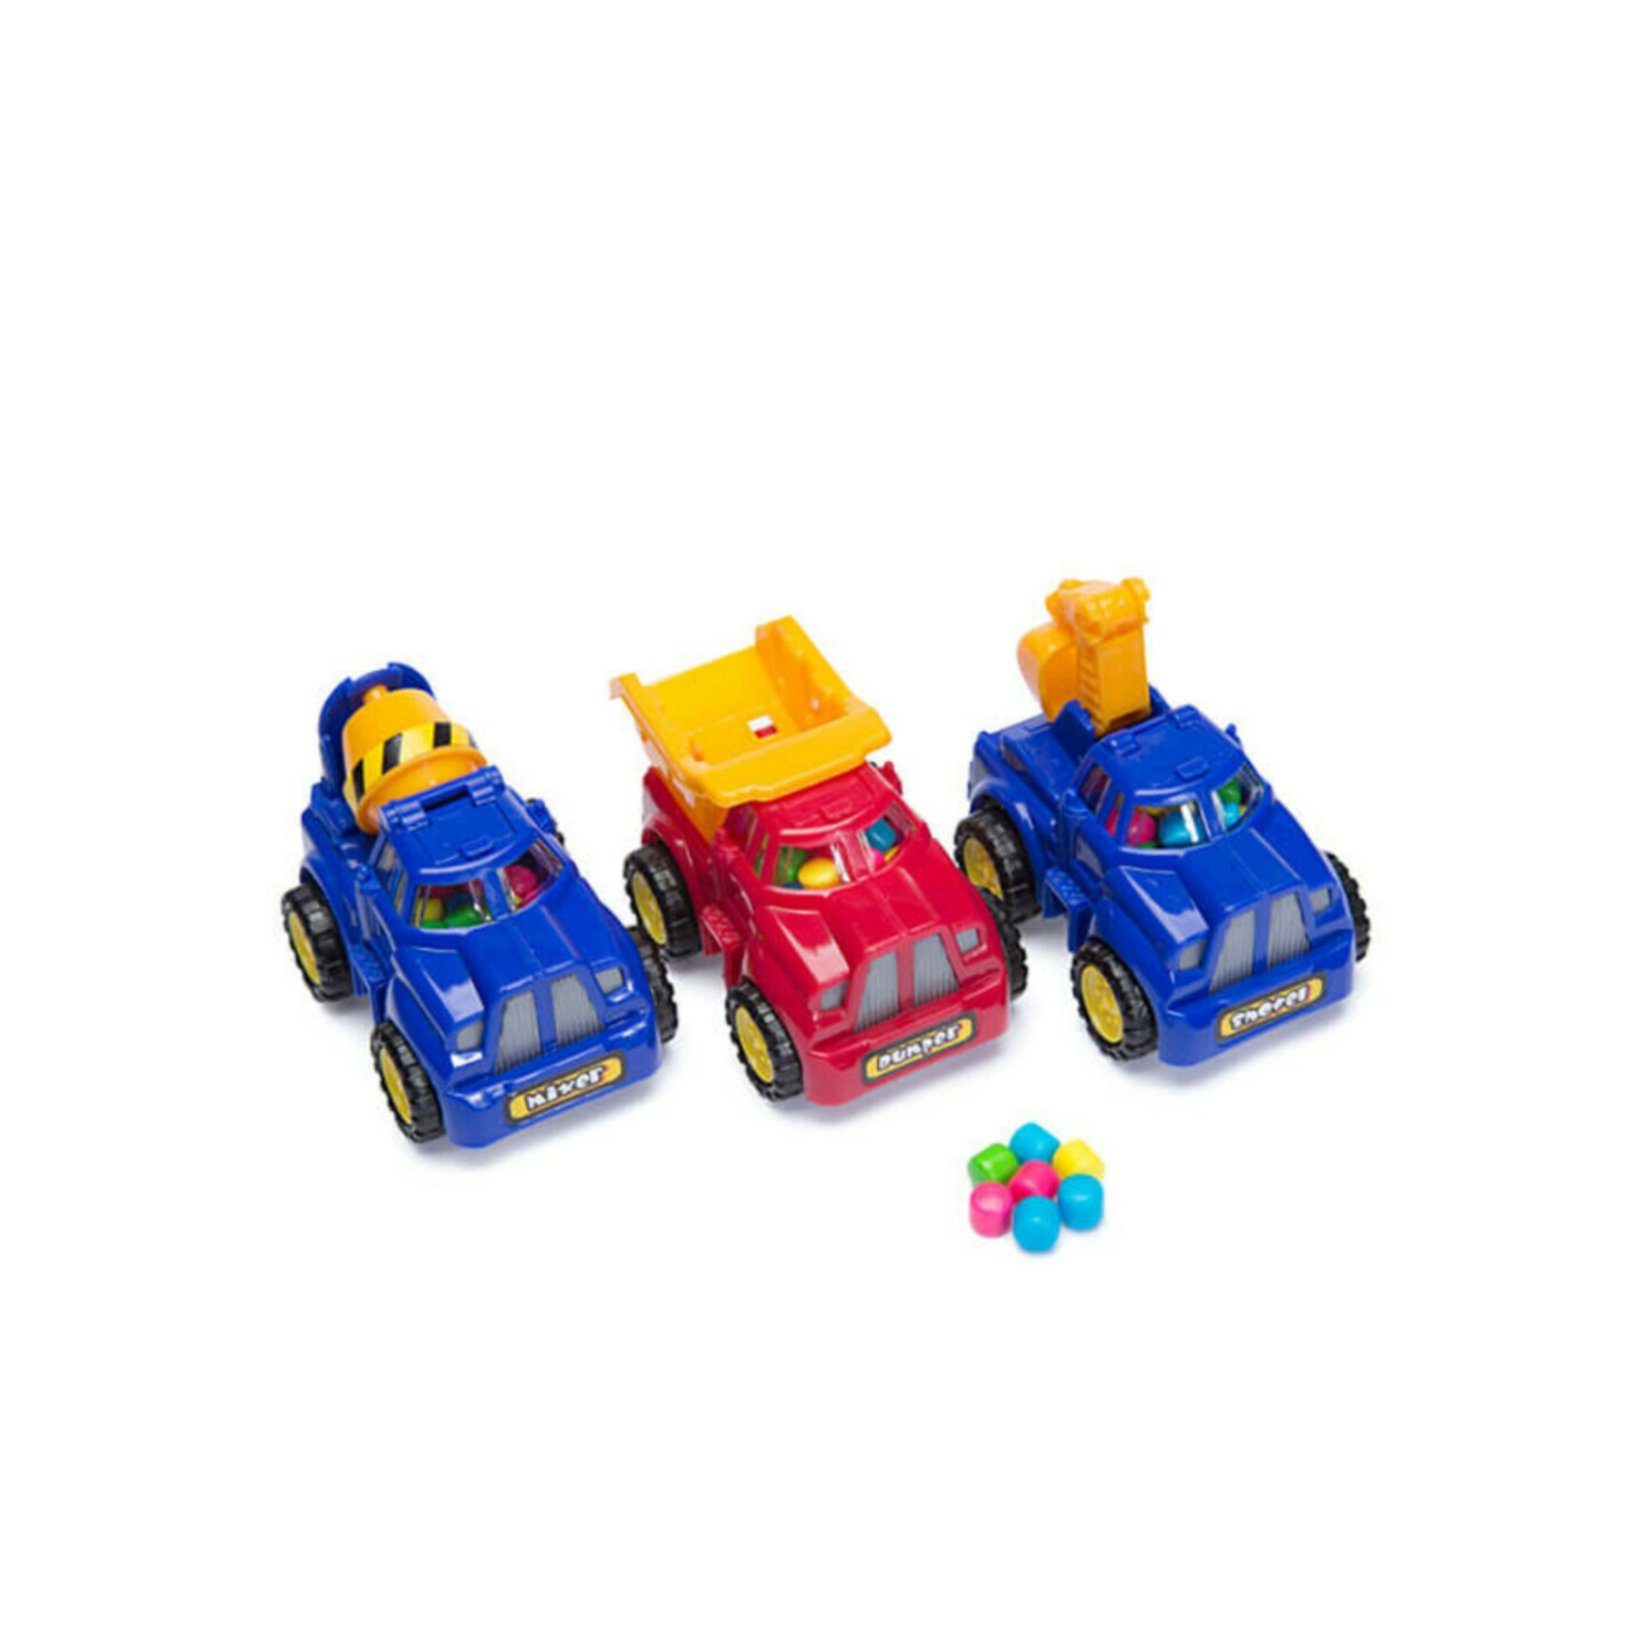 Kidsmania Cone Zone Construction Trucks with Candy 12ct